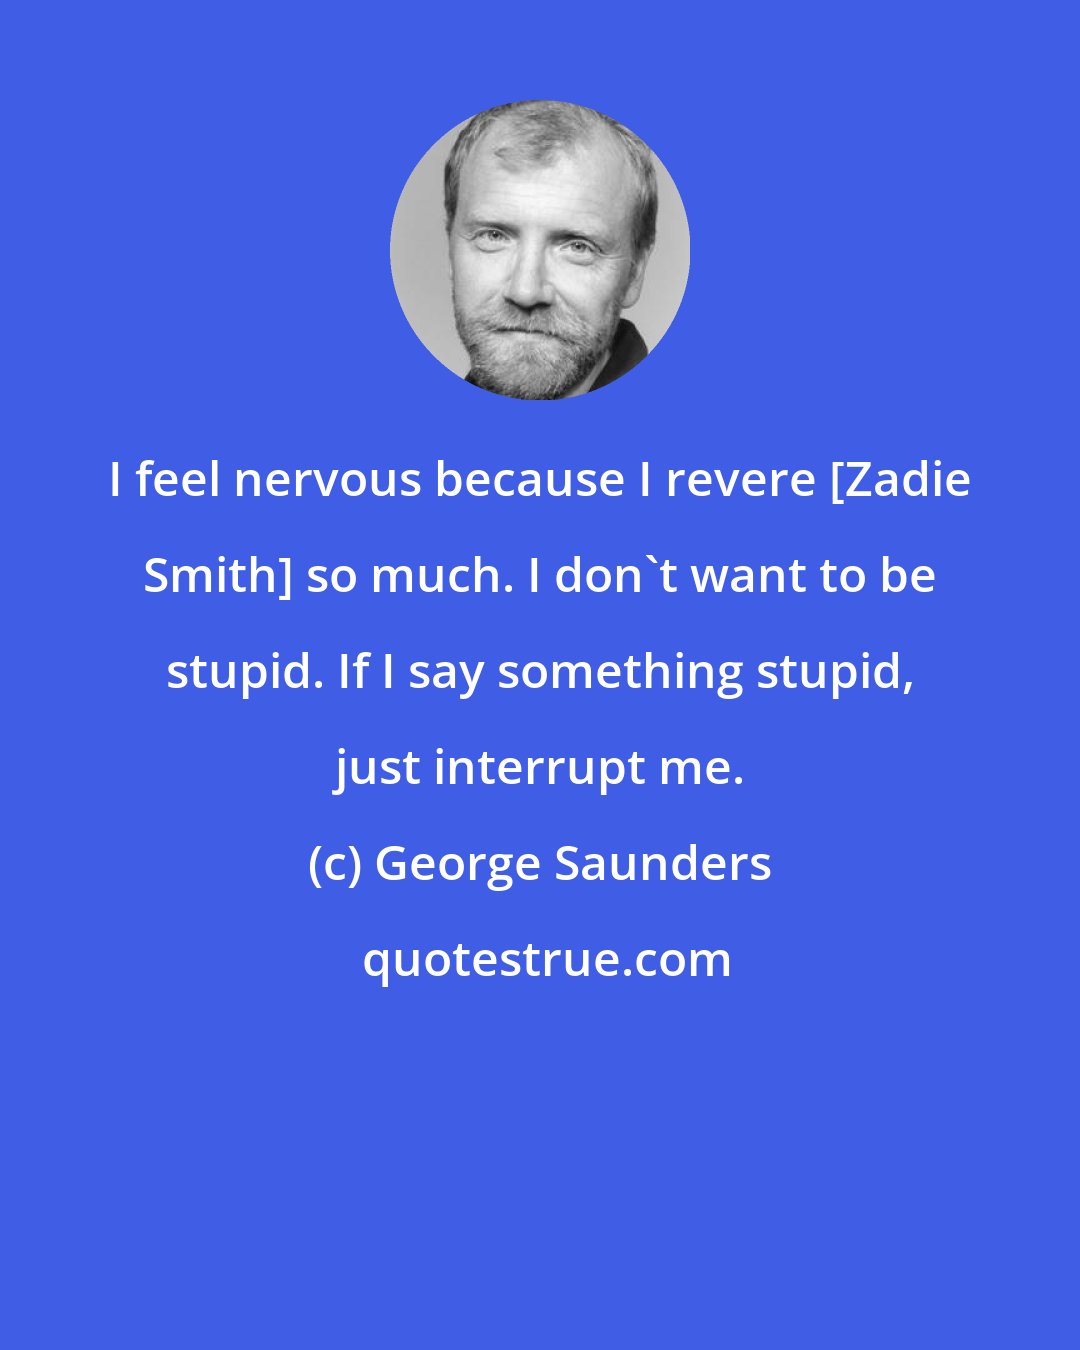 George Saunders: I feel nervous because I revere [Zadie Smith] so much. I don't want to be stupid. If I say something stupid, just interrupt me.